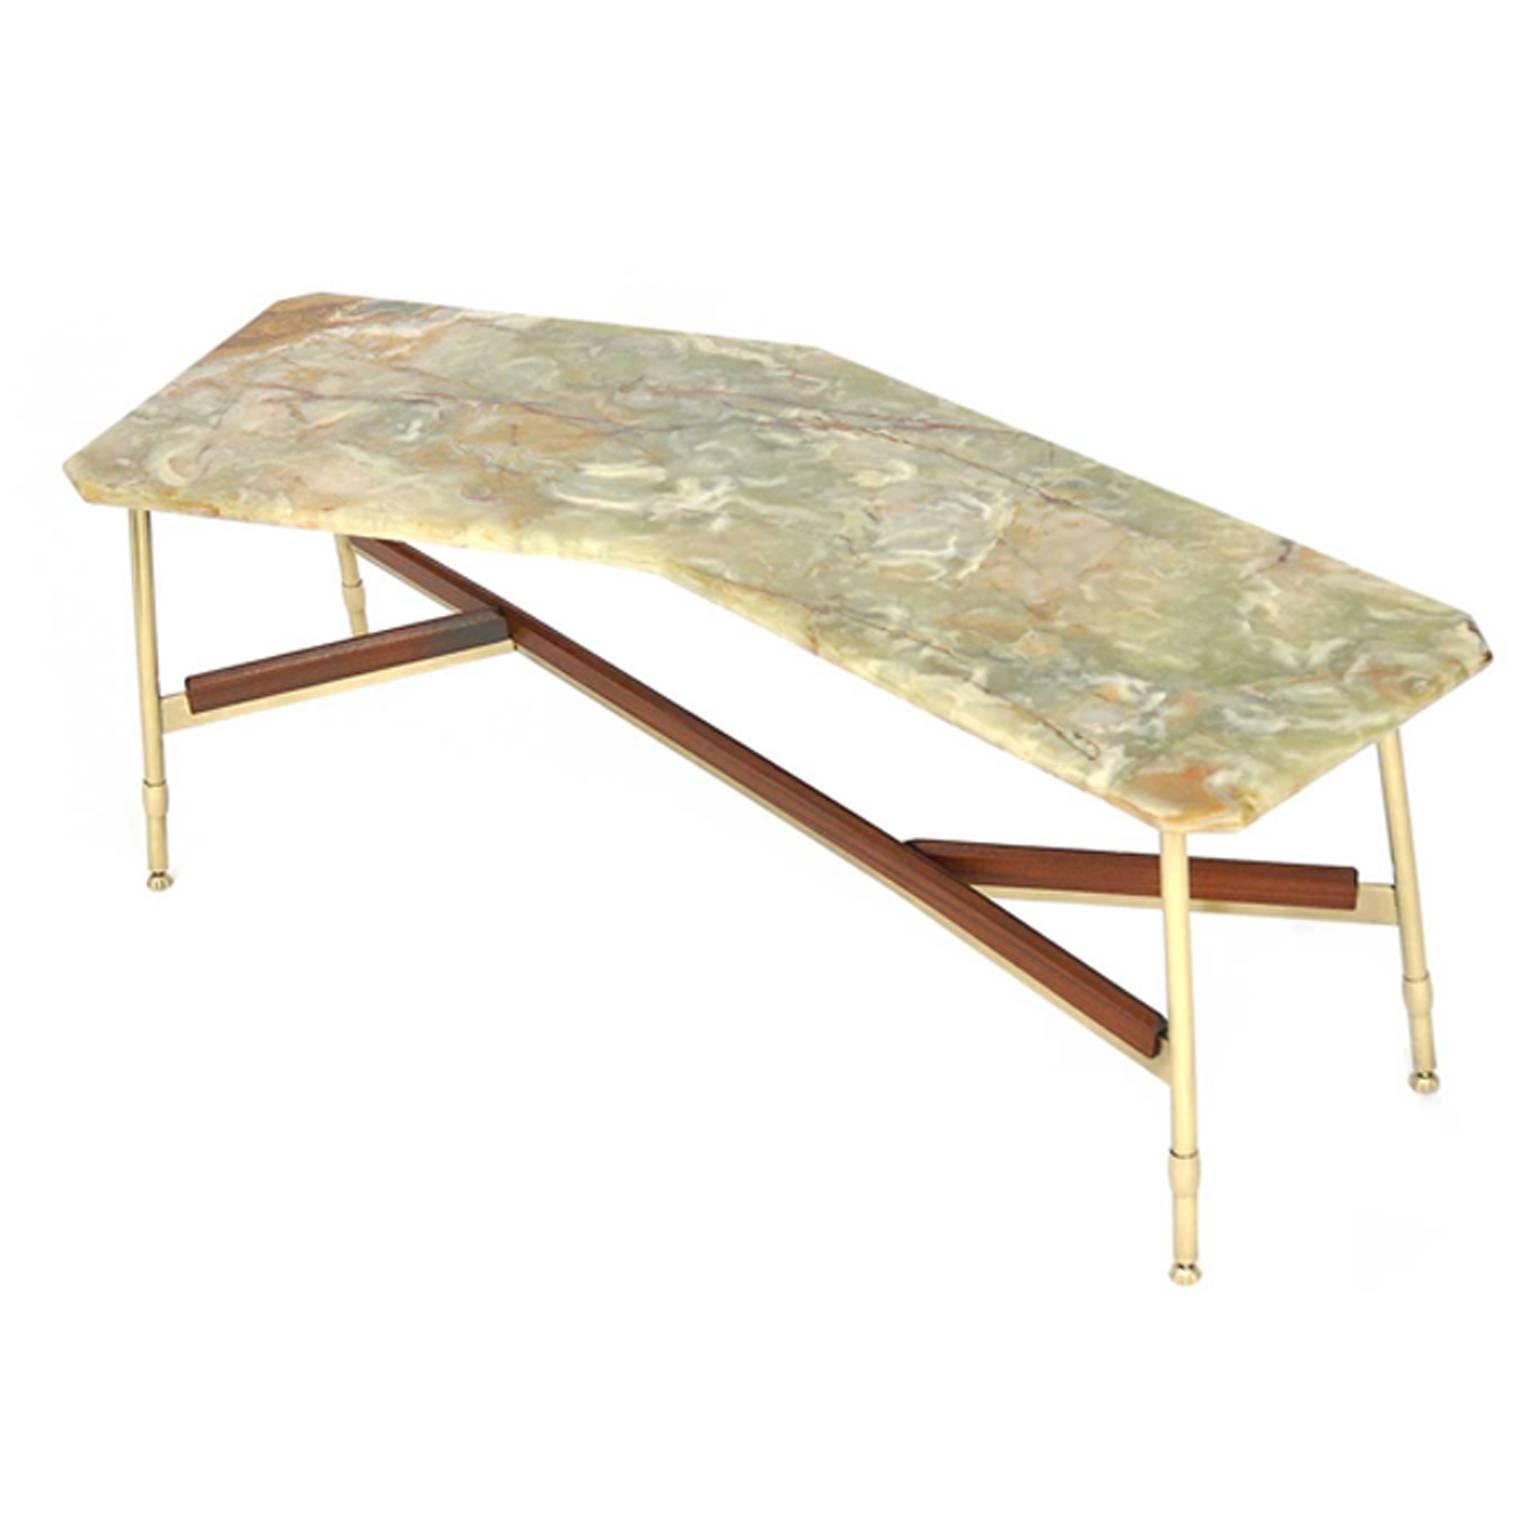 Italian Coffee Table with Onyx Tabletop Made in, Italy, 1950